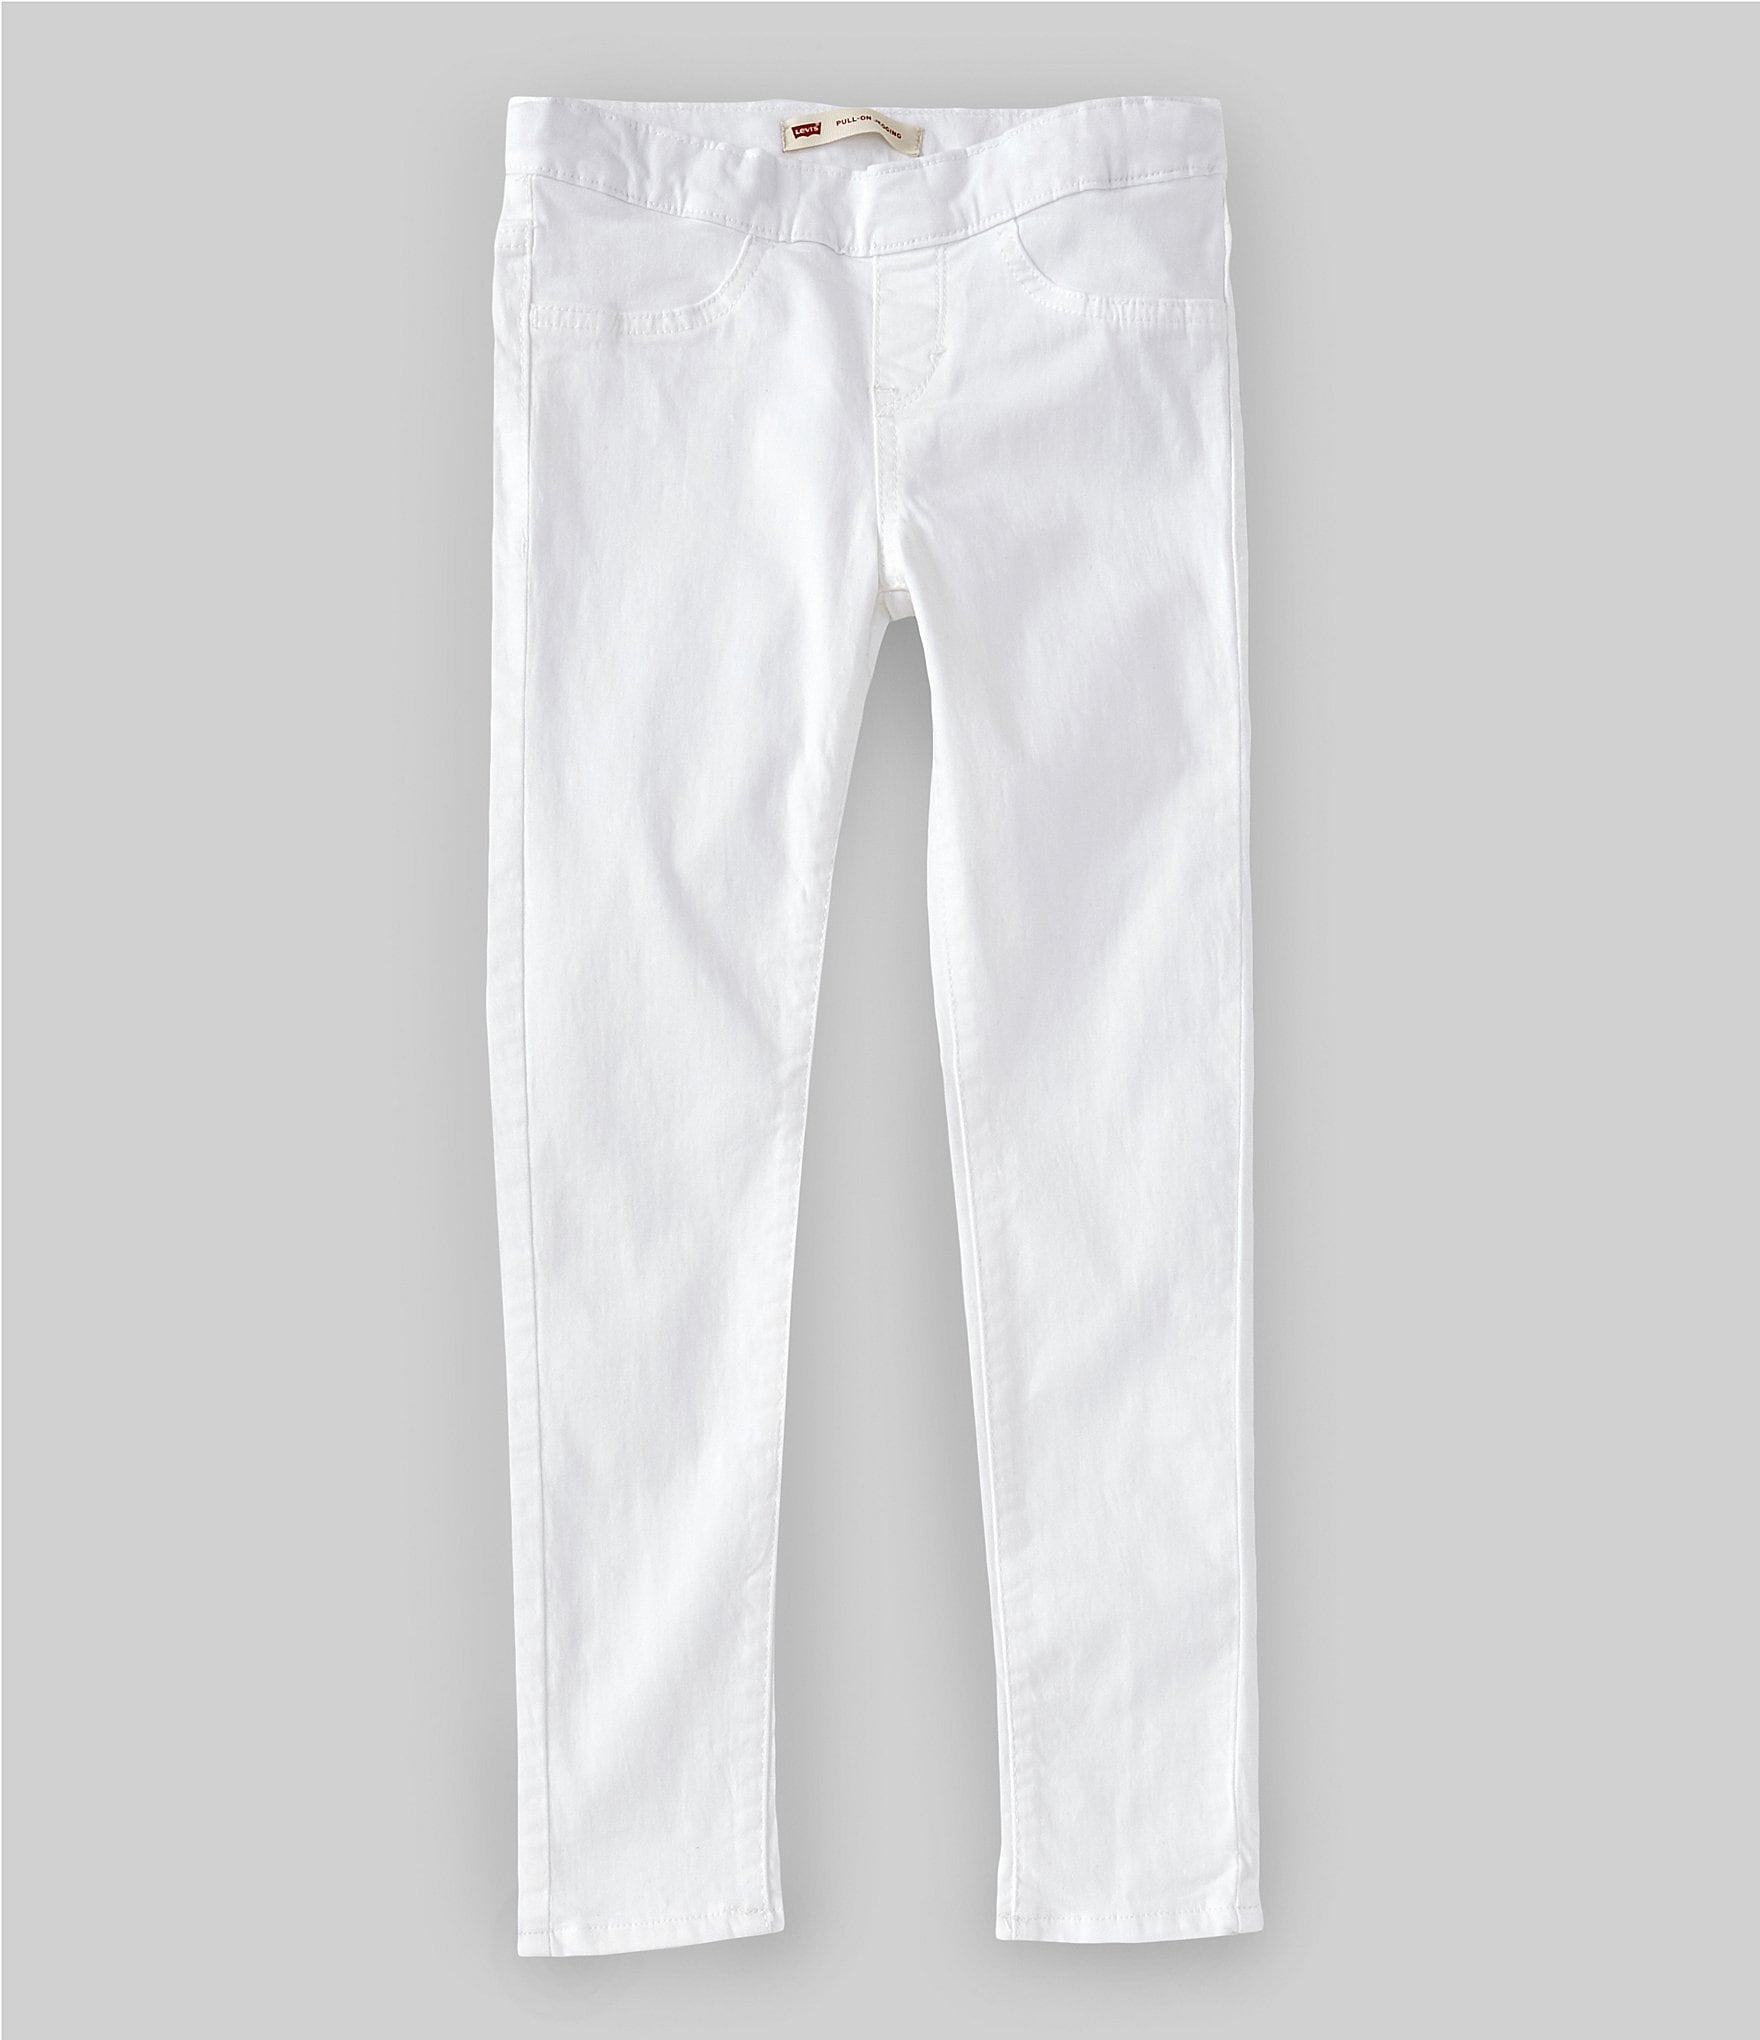 10 Ways to Casually Style White Jeans: A Guide for Women Over 50 - Cindy  Hattersley Design